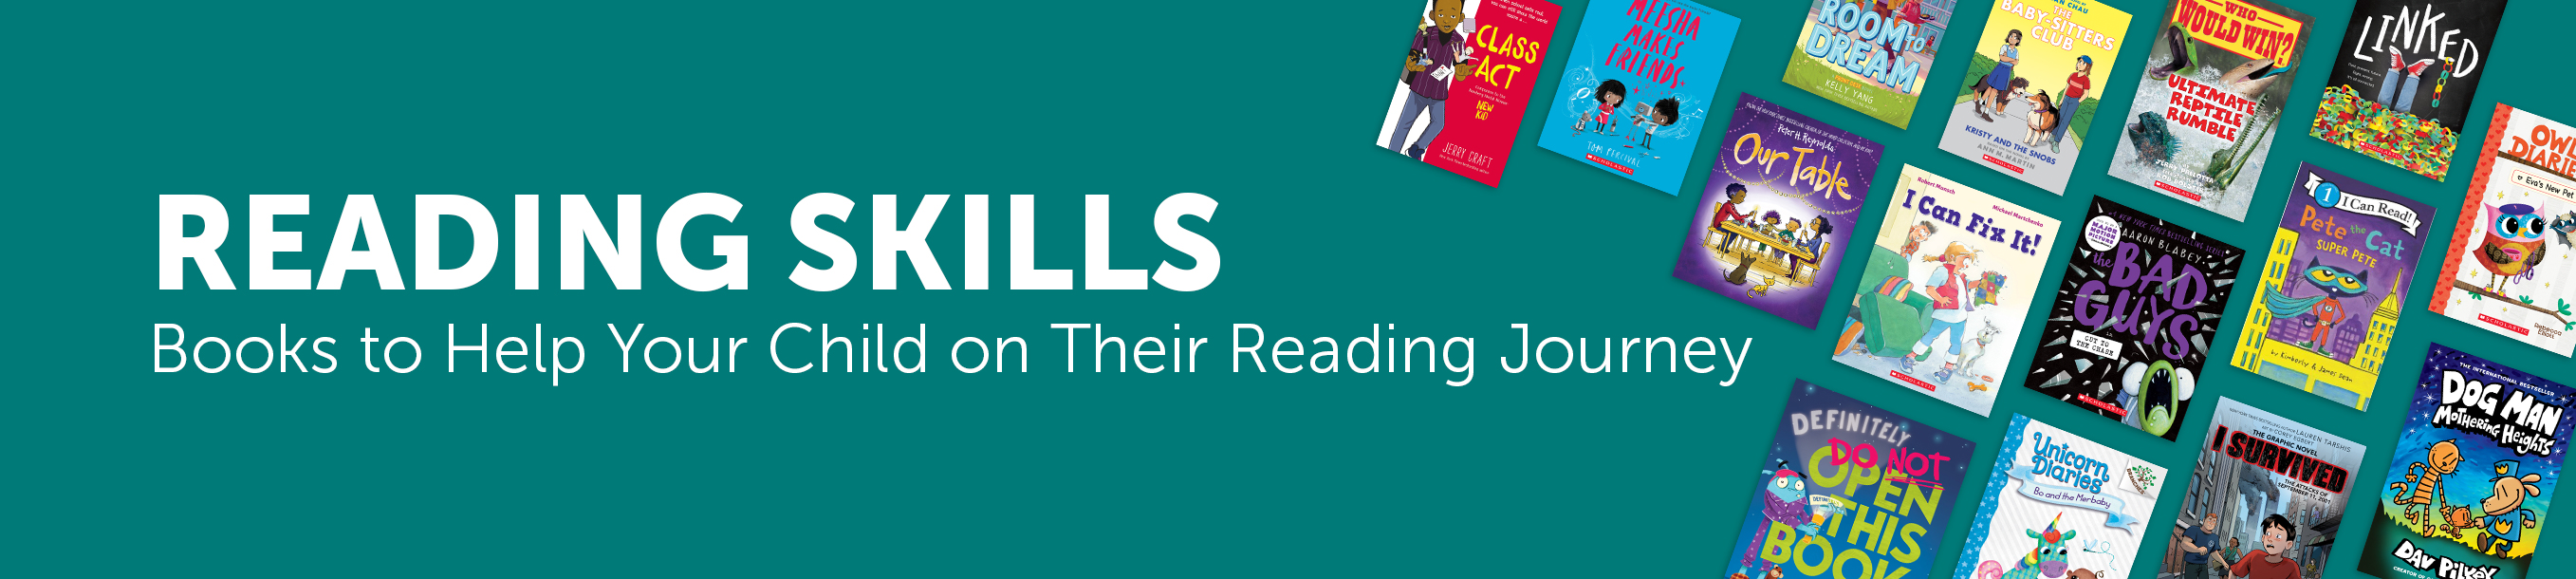 Reading Skills - Books to Help your Child on Their Reading Journey